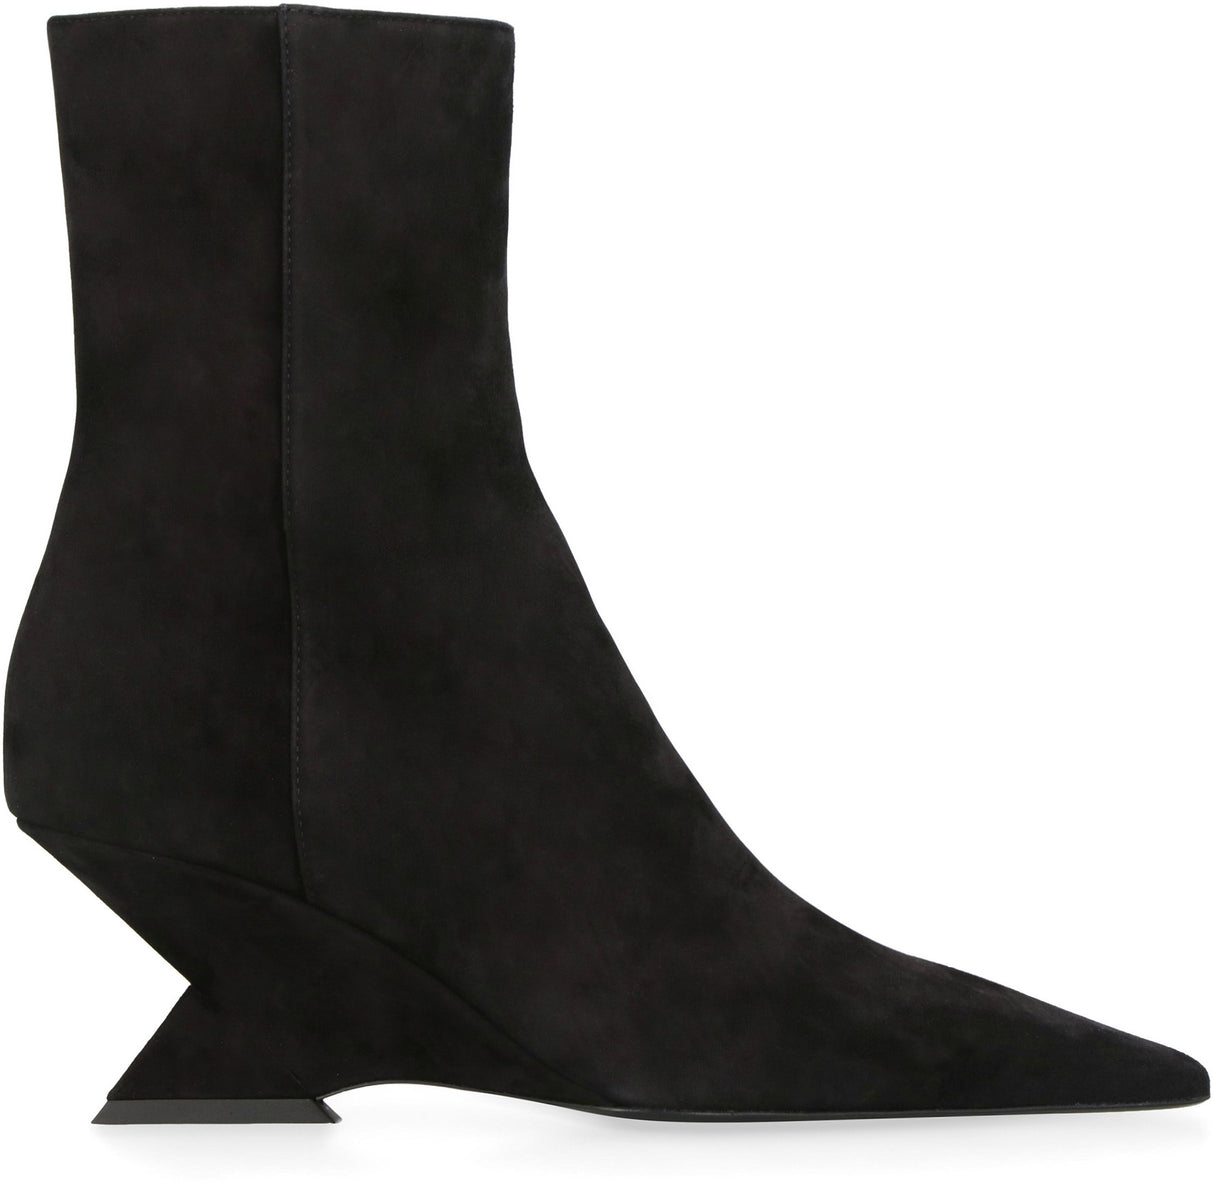 Black Suede Ankle Boots with Pyramid Wedge for Women